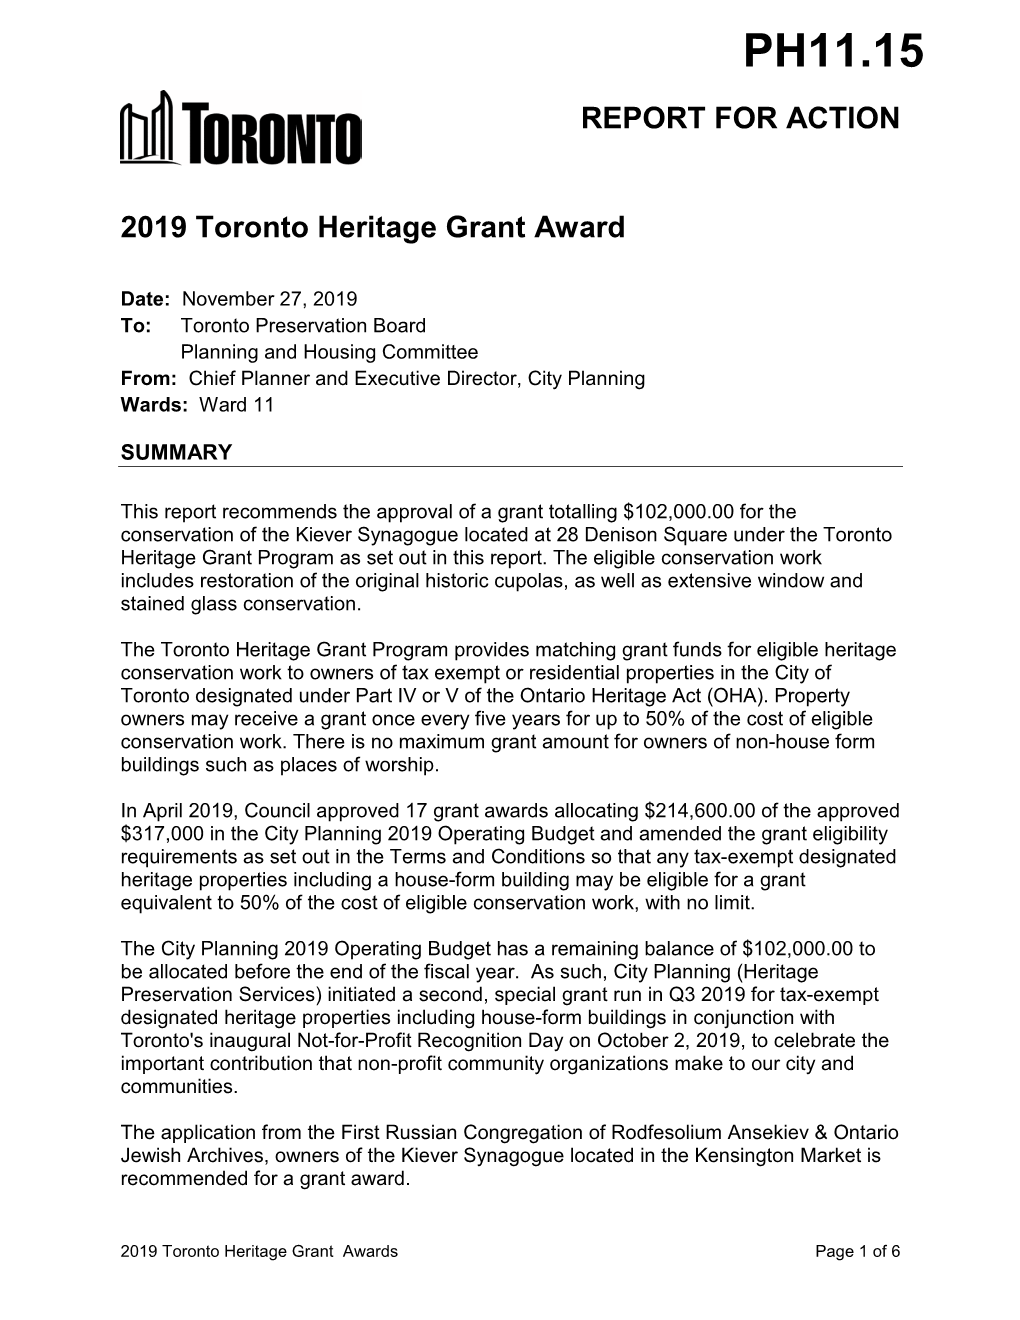 REPORT for ACTION 2019 Toronto Heritage Grant Award